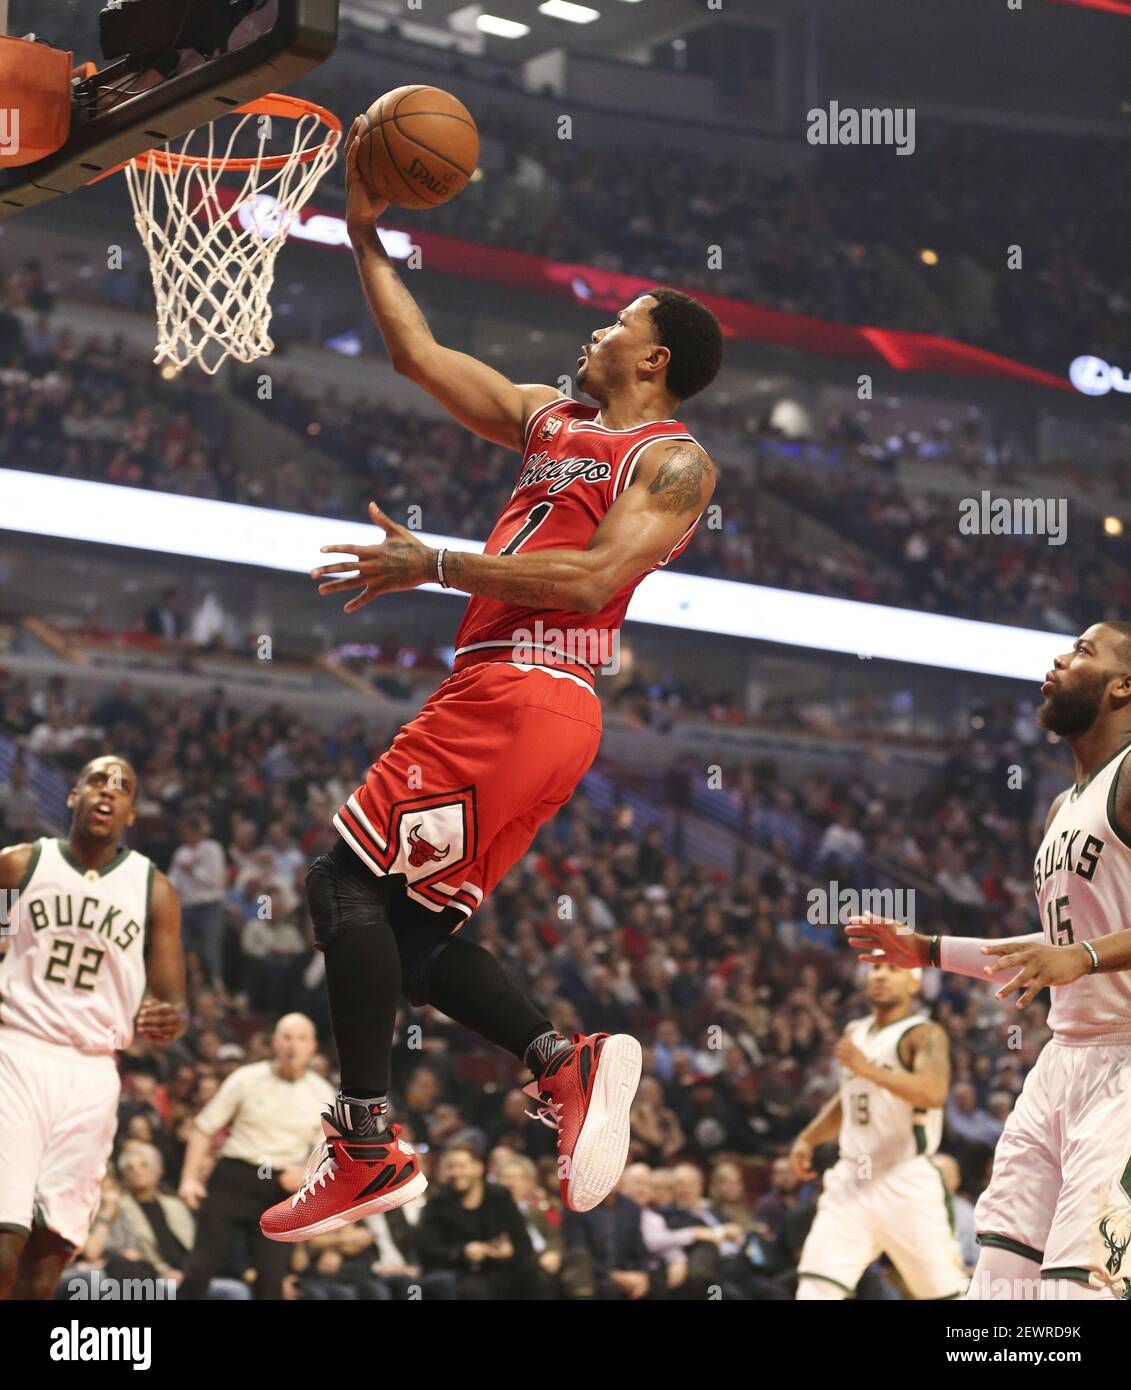 Chicago Bulls' Derrick Rose to sit out 2016 Olympics - Sports